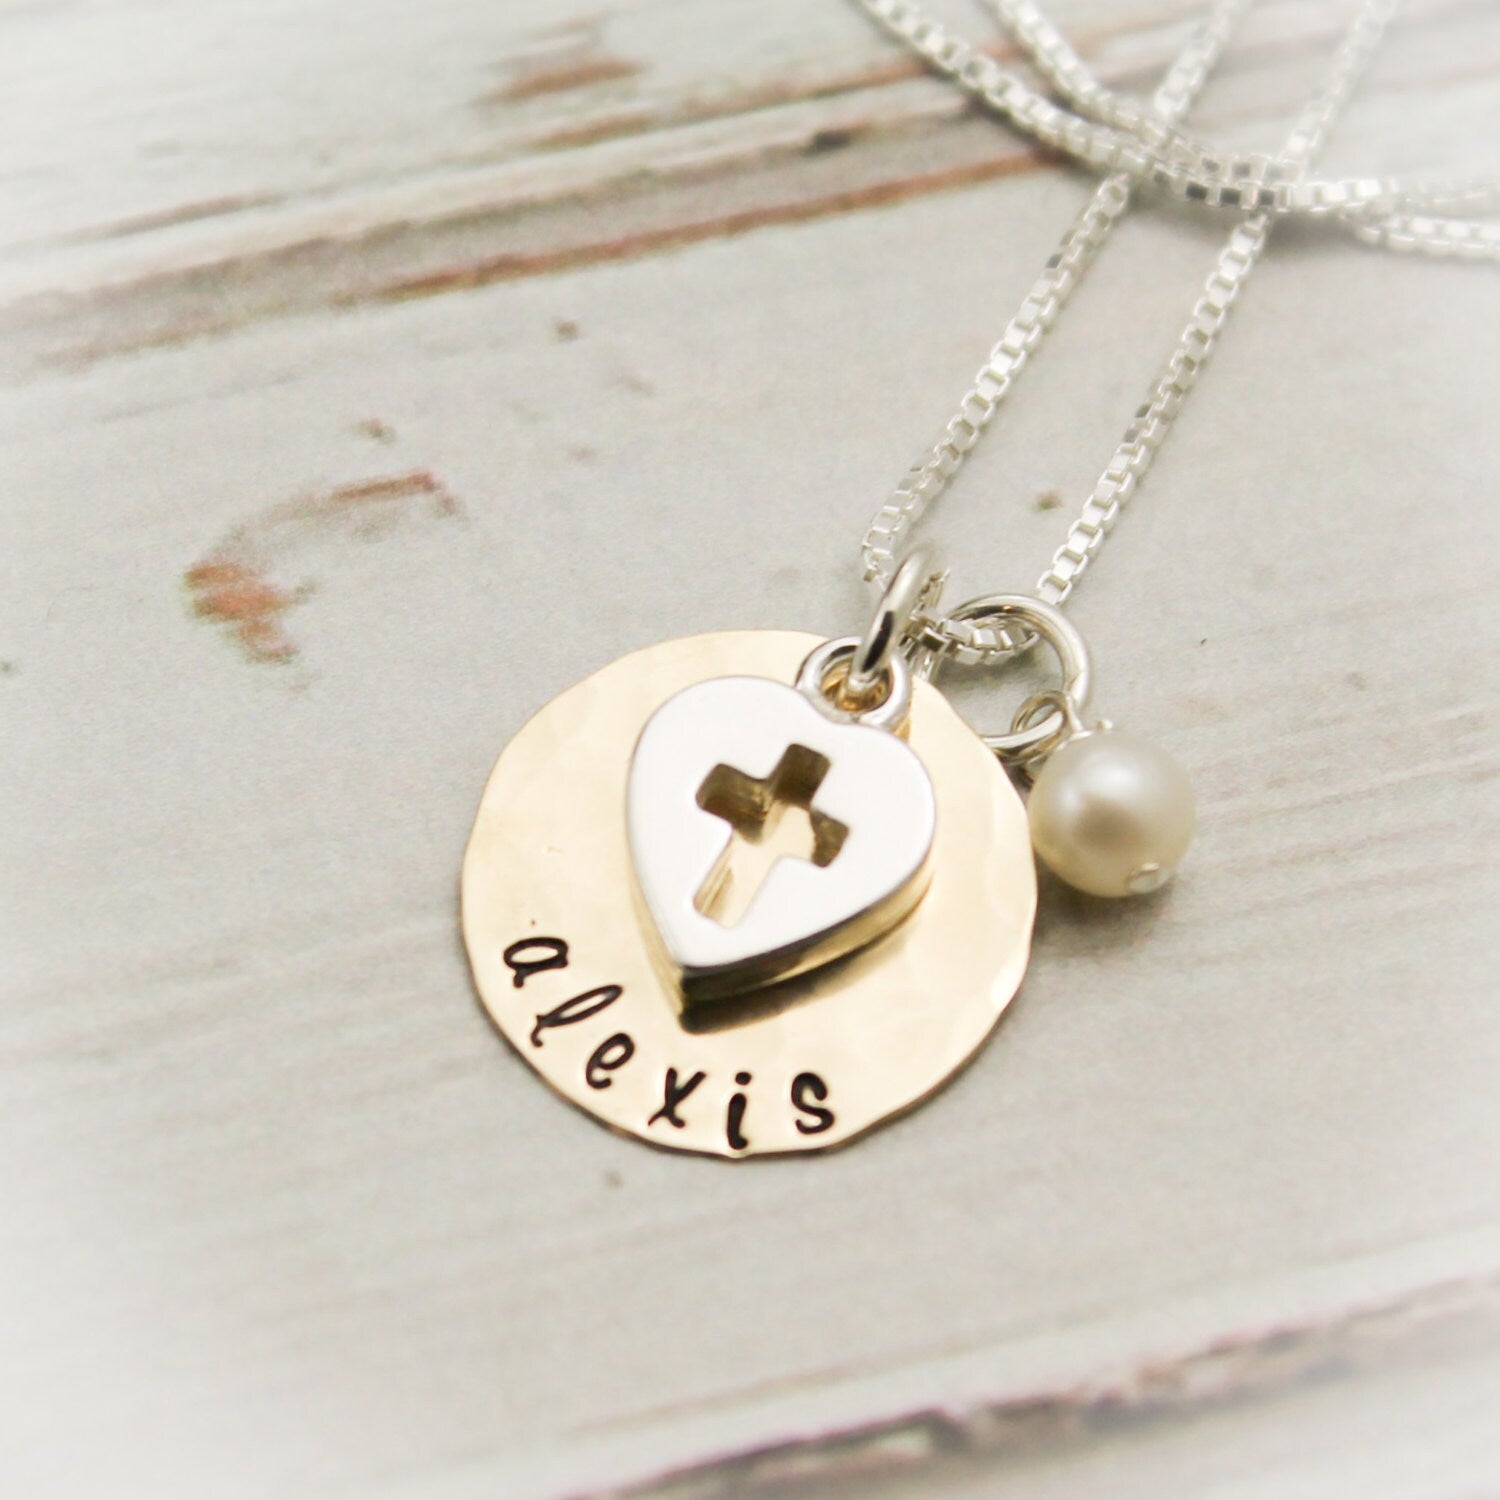 Confirmation Necklace Personalized Hand Stamped 14K Gold Filled and Sterling Silver with Heart Cross Charm